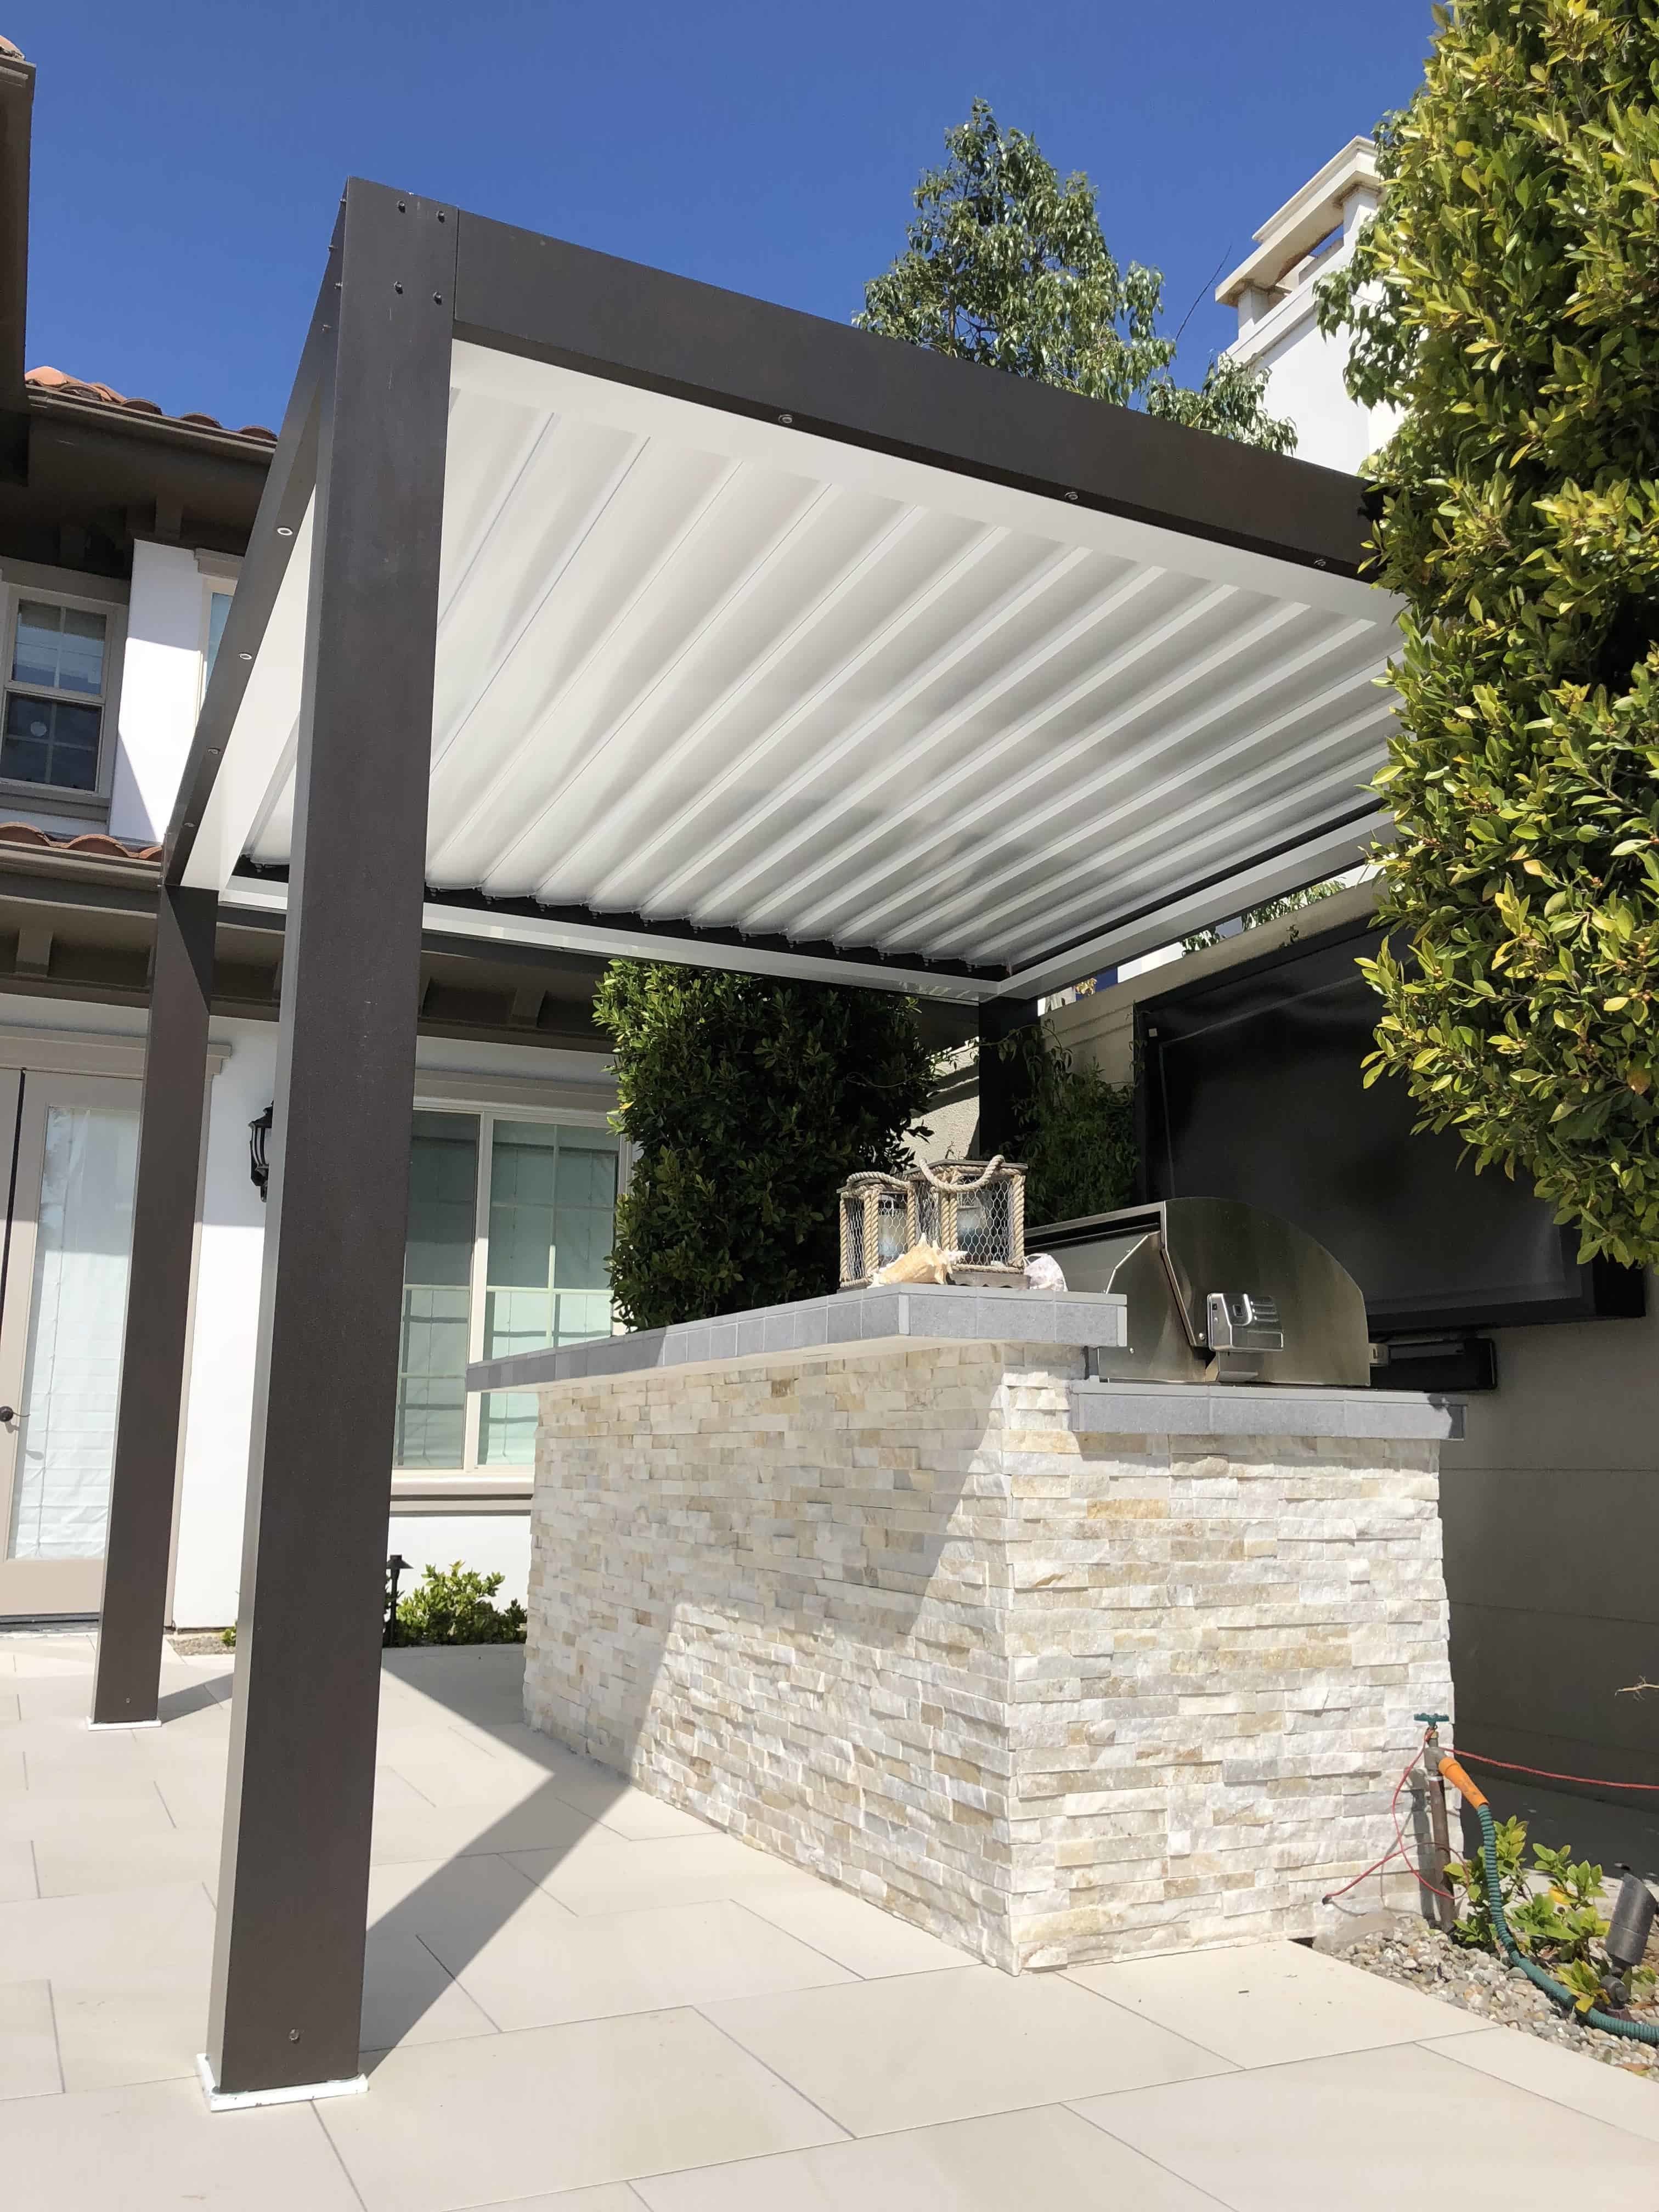 Modern Contemporary Patio Cover Designs Alumawood Factory Direct